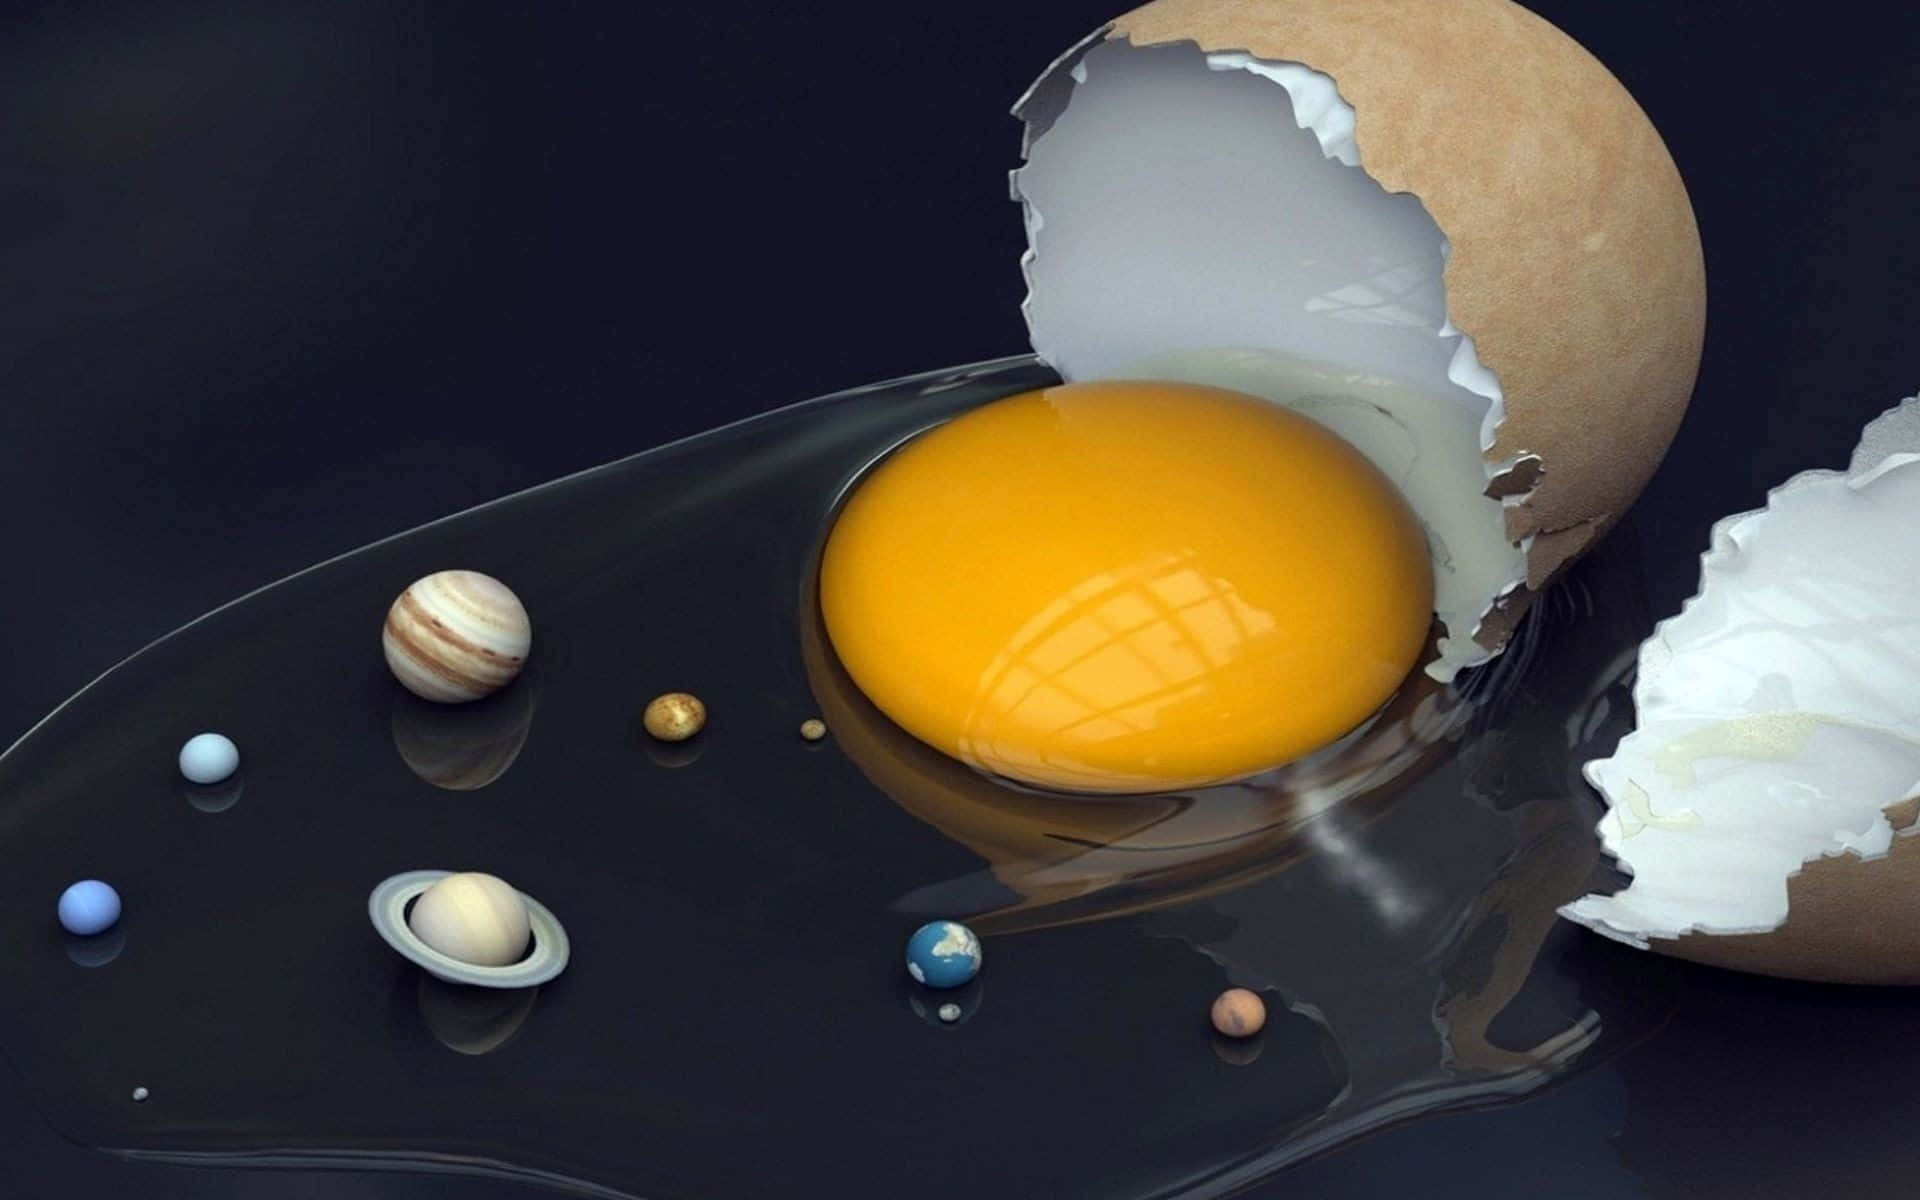 An Egg With Planets Inside